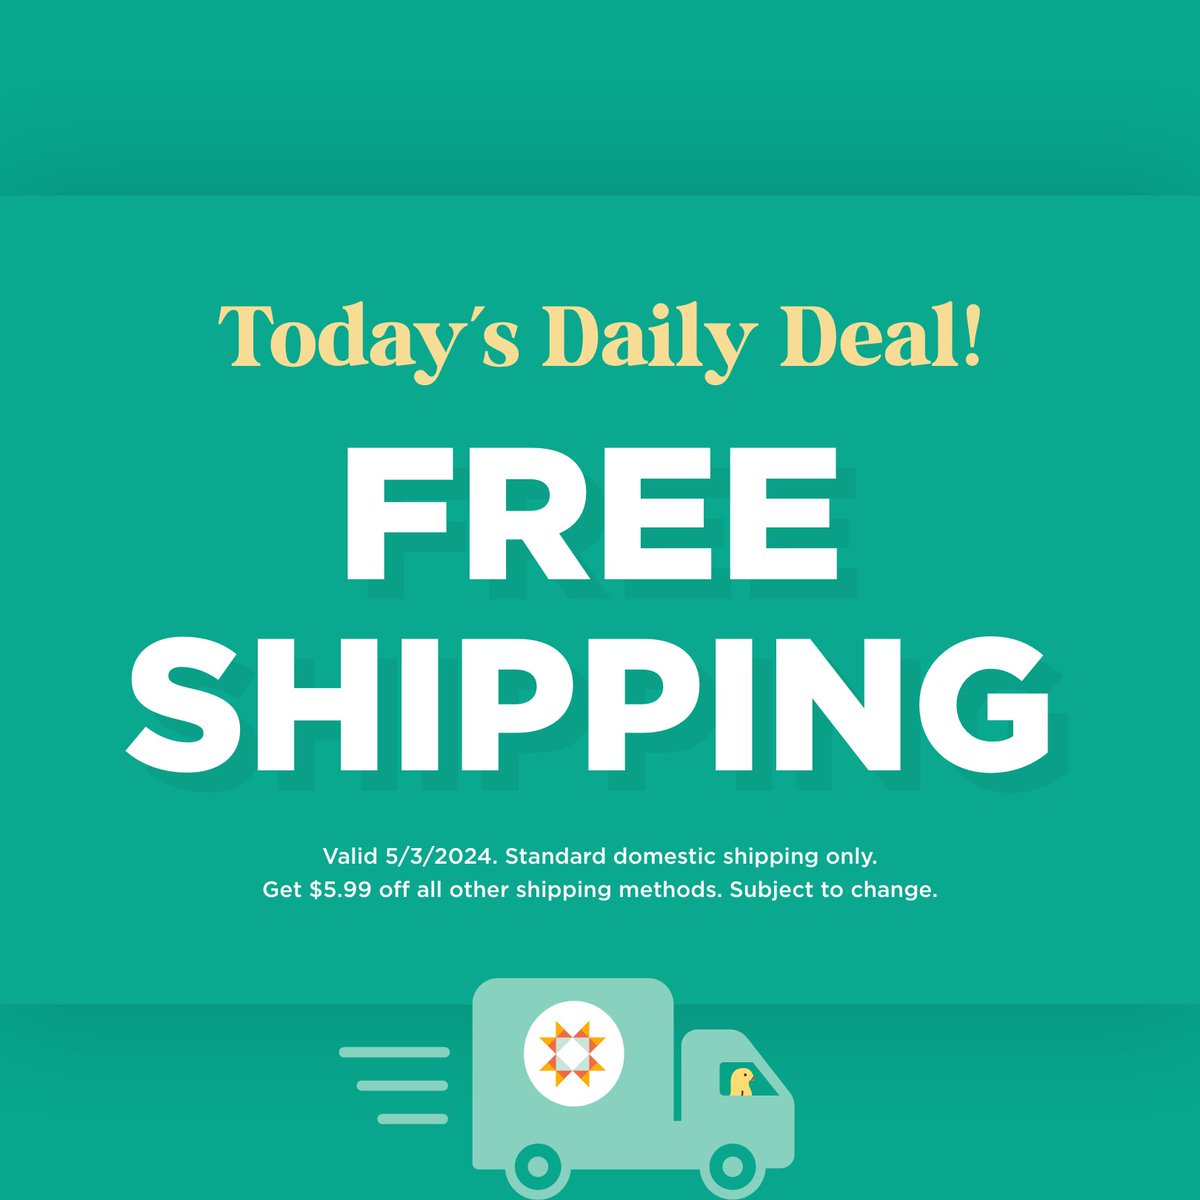 Today, get your orders shipped for FREE with today’s Daily Deal – Free Shipping! That’s right, shop til you drop and forget about the shipping cost. Today, it’s on us! Shop now: bit.ly/4aba6Fy (Valid 05/03/24. Restrictions apply.)